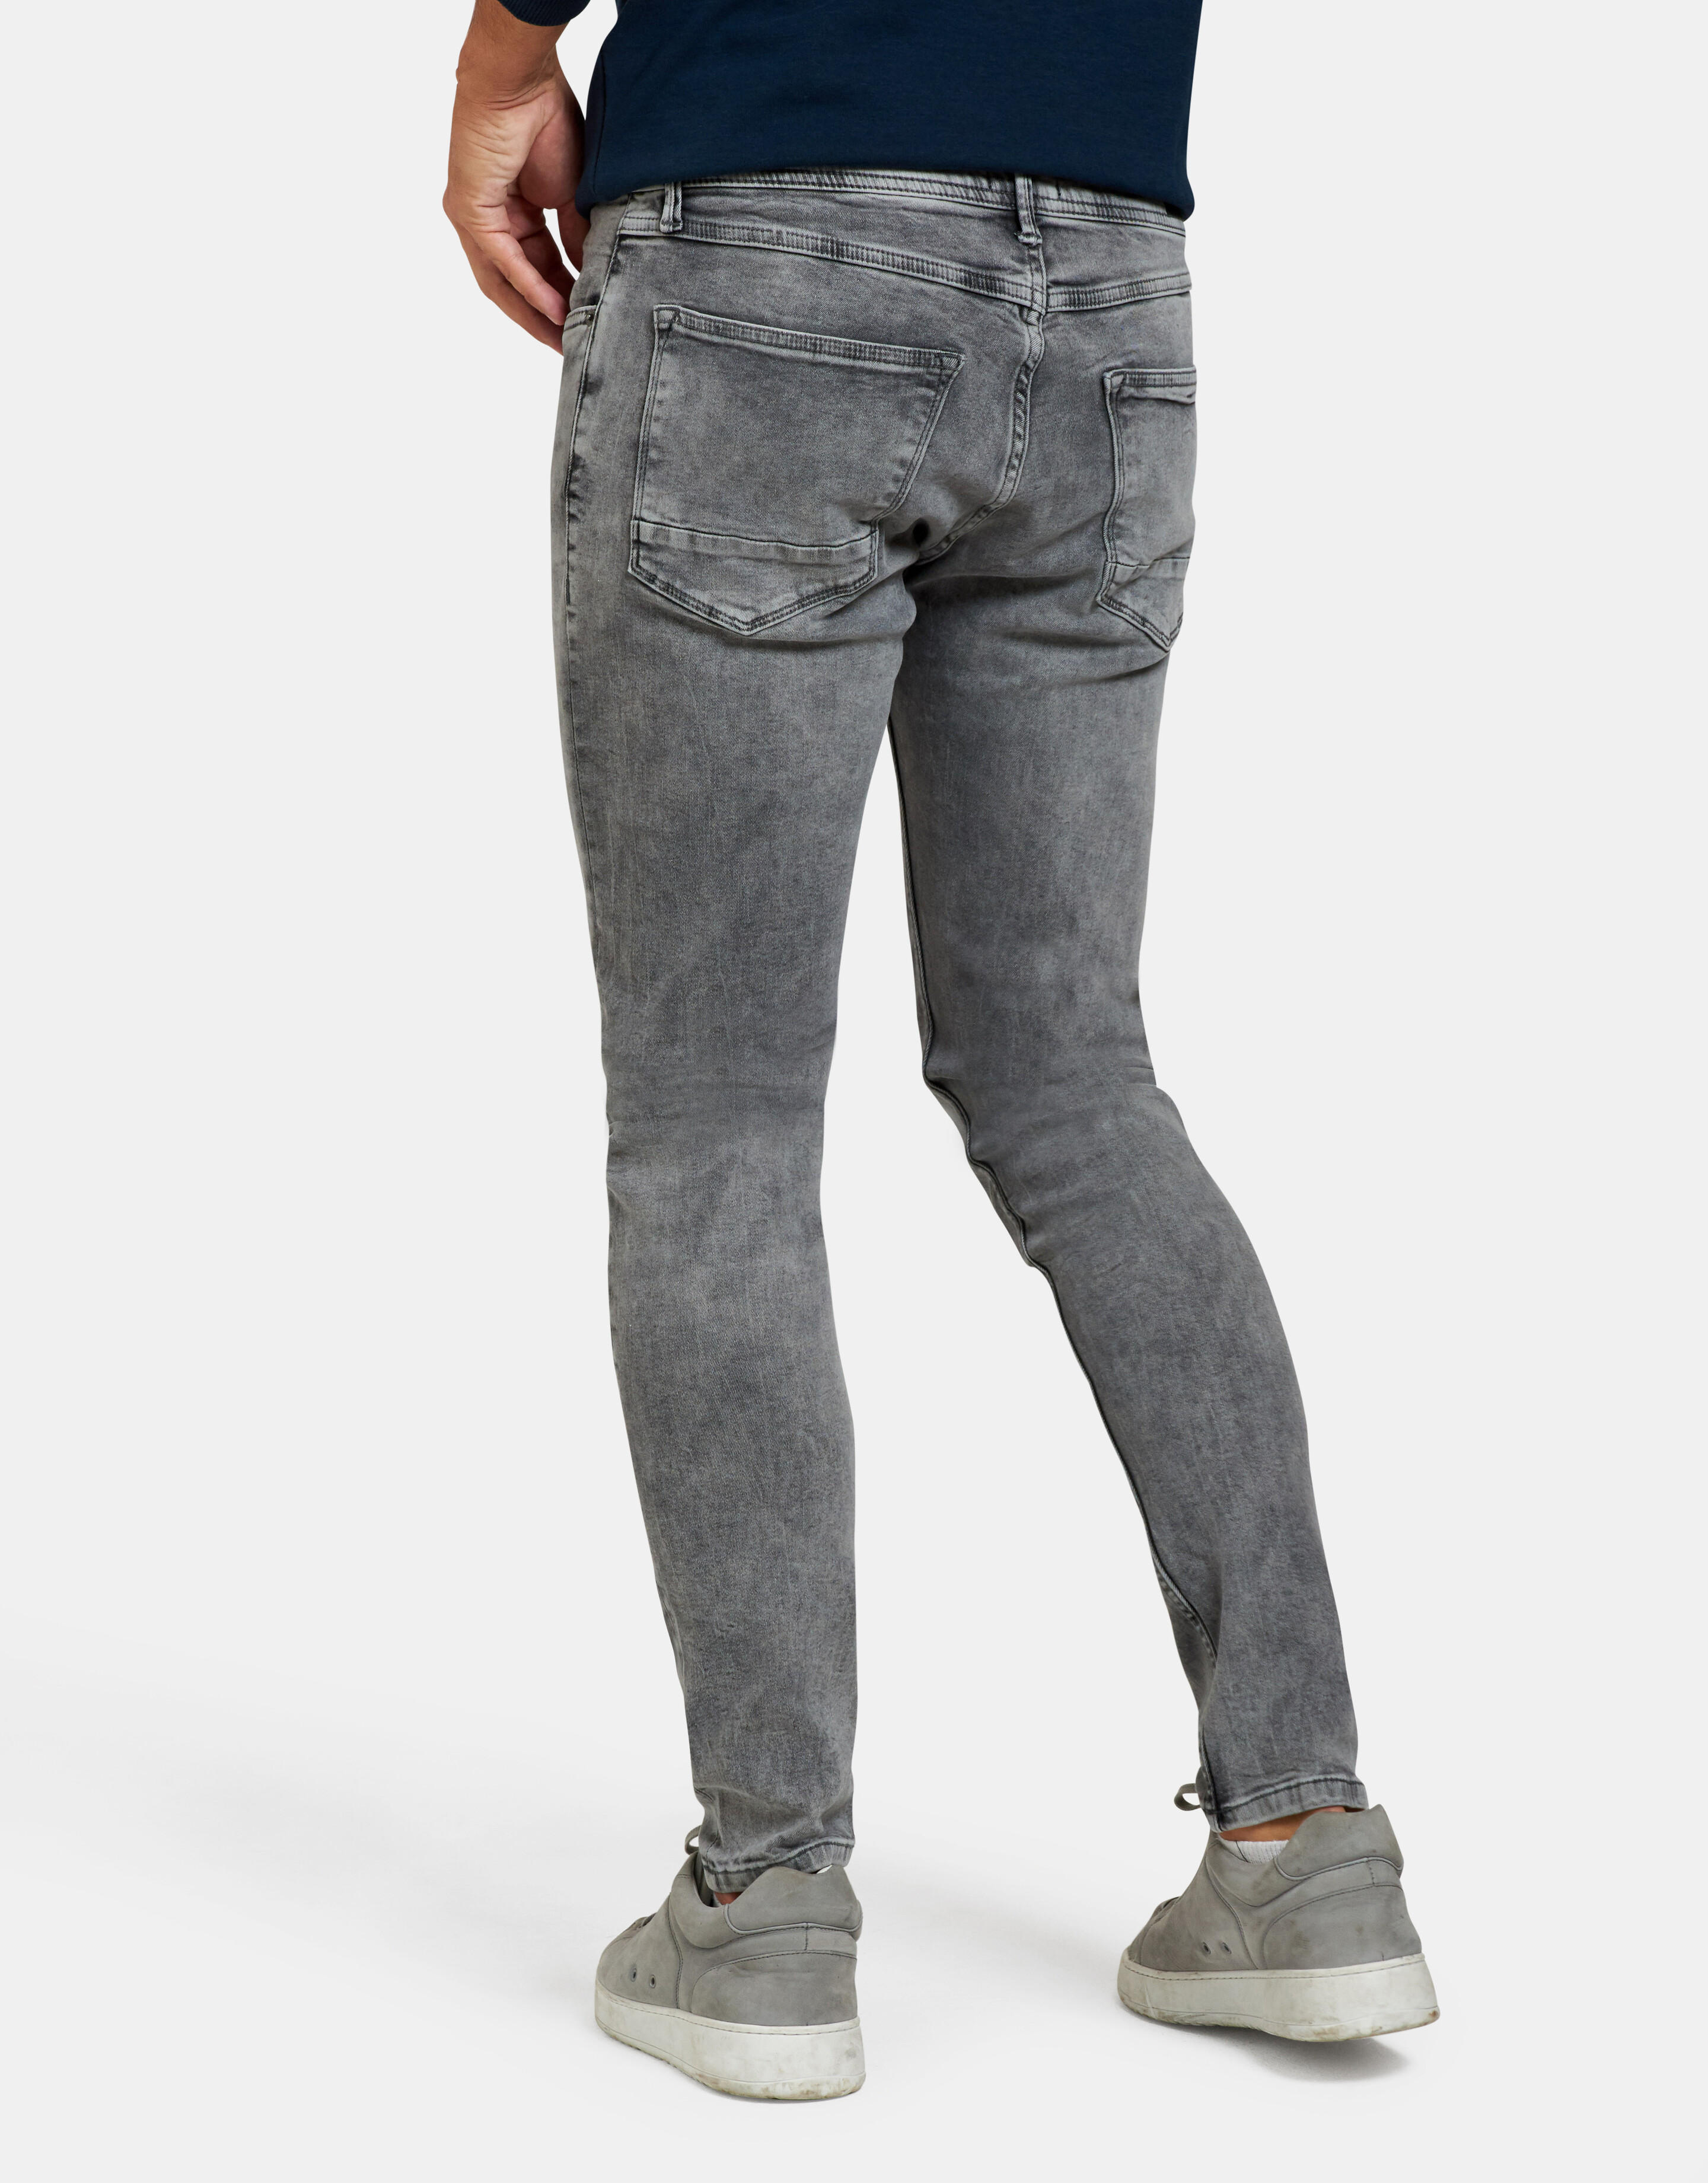 Leroy Skinny Grey Jeans L34 REFILL AUTHENTIC